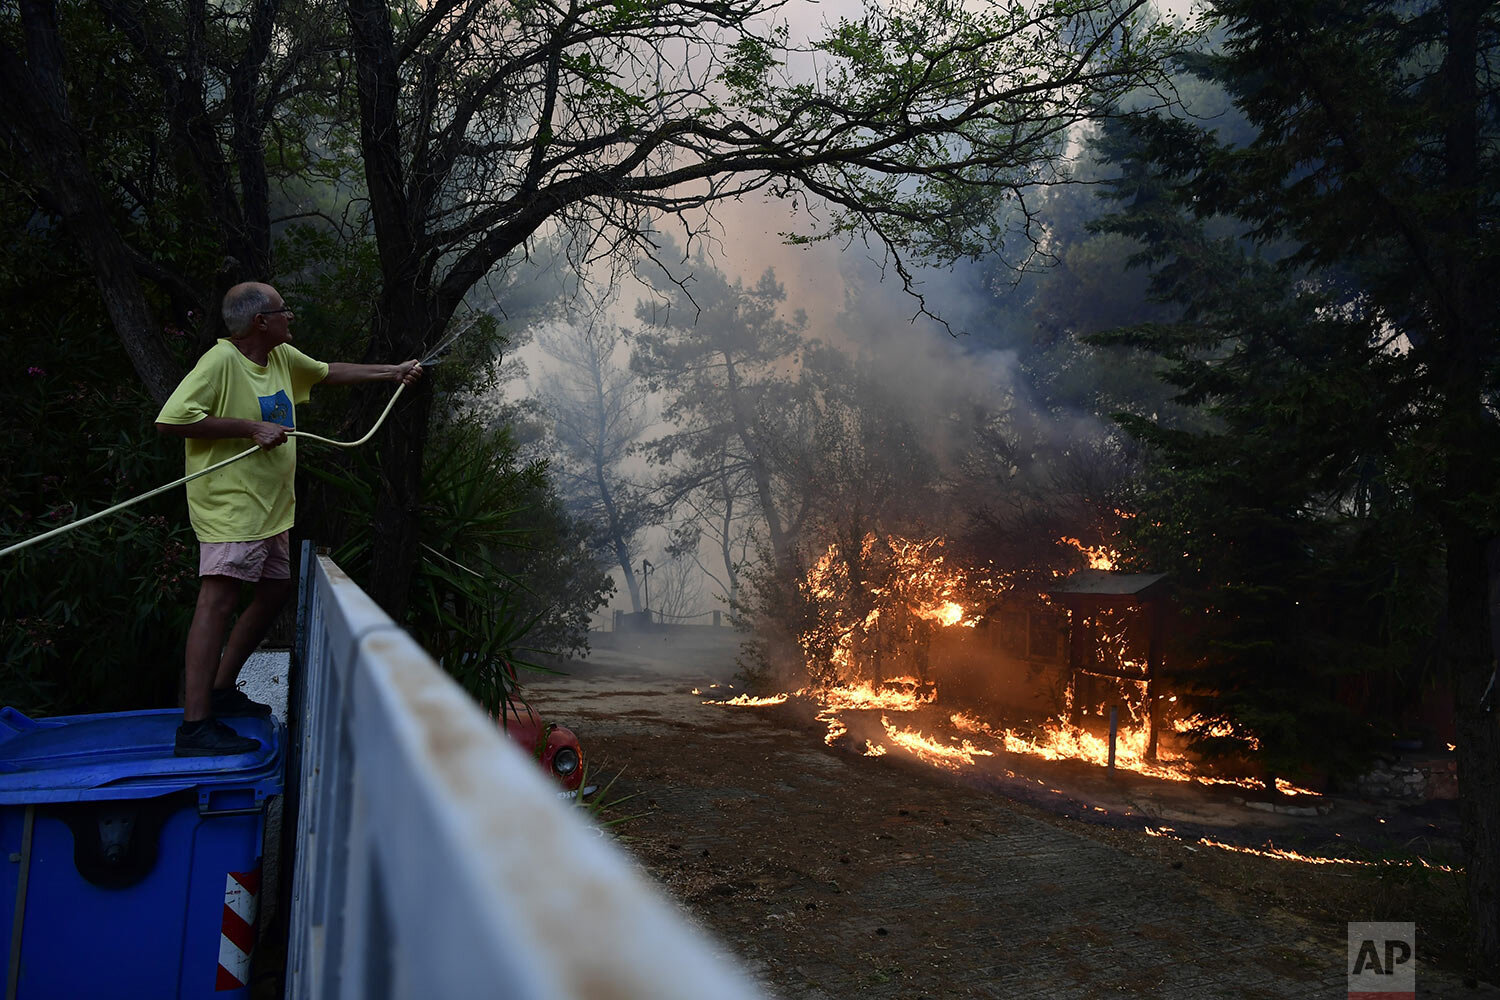  A man drops water to burning trees during a wildfire in Adames area, northern Athens, Greece, Tuesday, Aug. 3, 2021. Hundreds of residents living near a forest area north of Athens fled their homes Tuesday as a wildfire reached residential areas as 